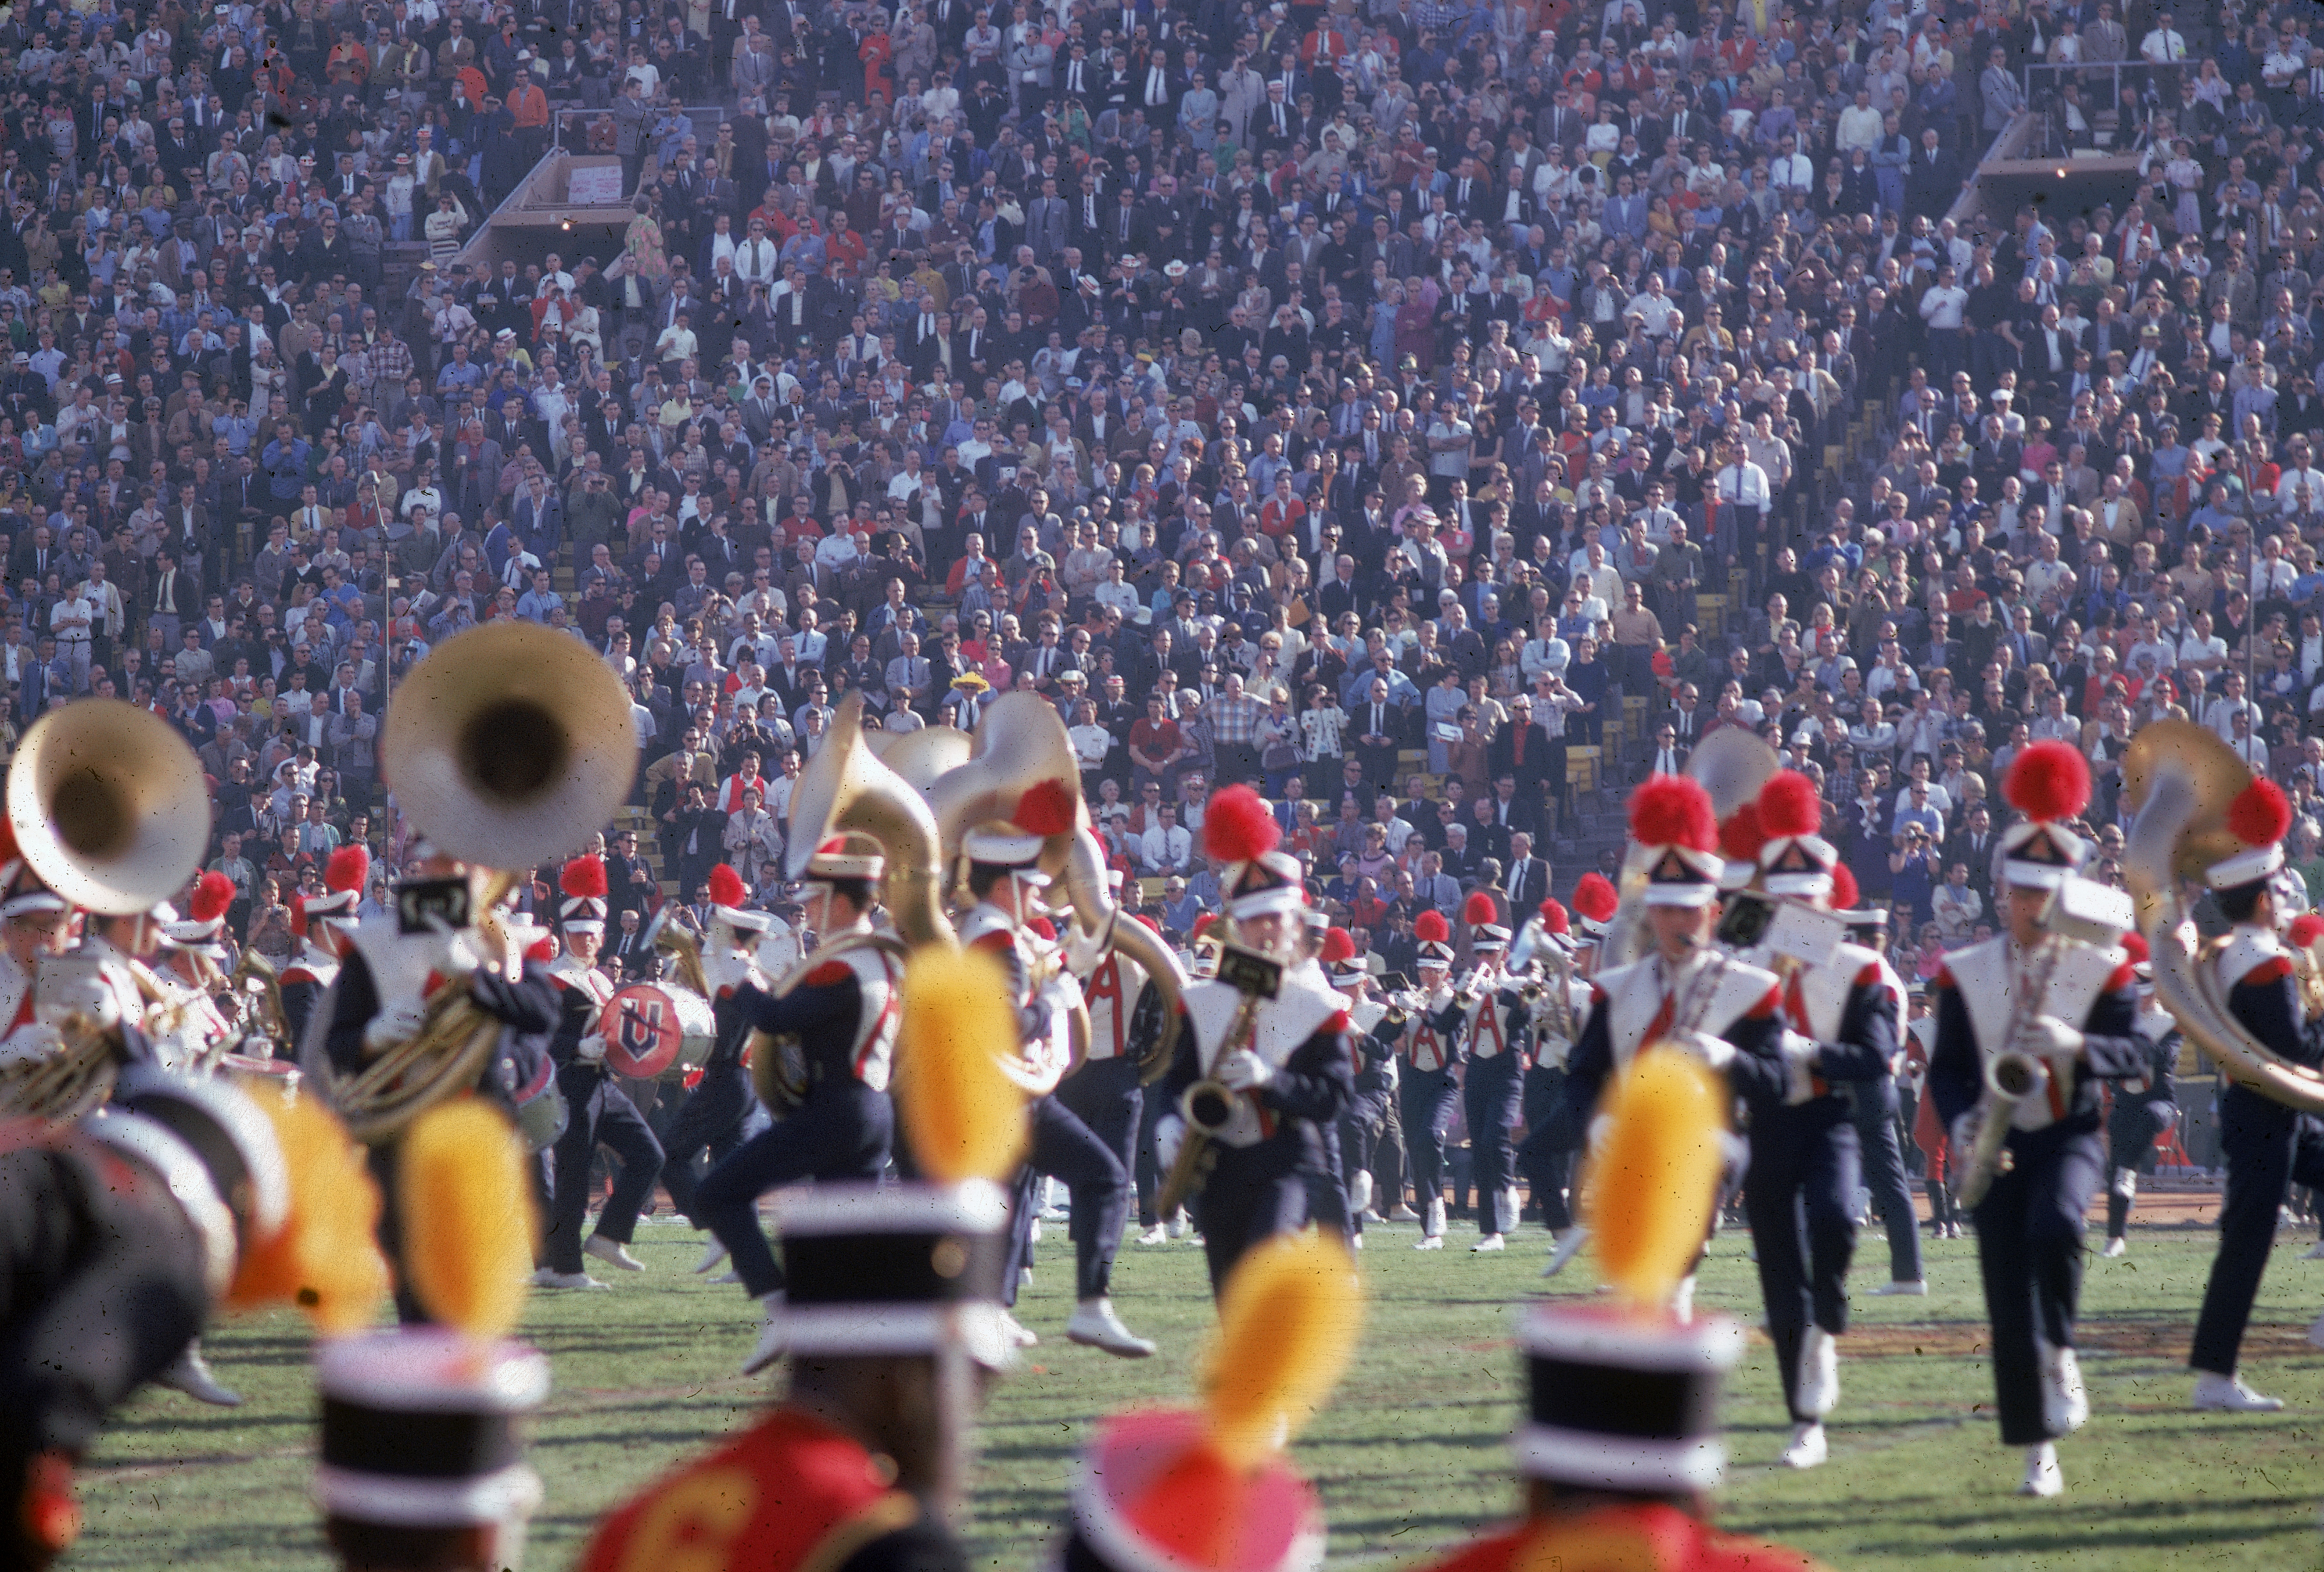 A marching band on the field